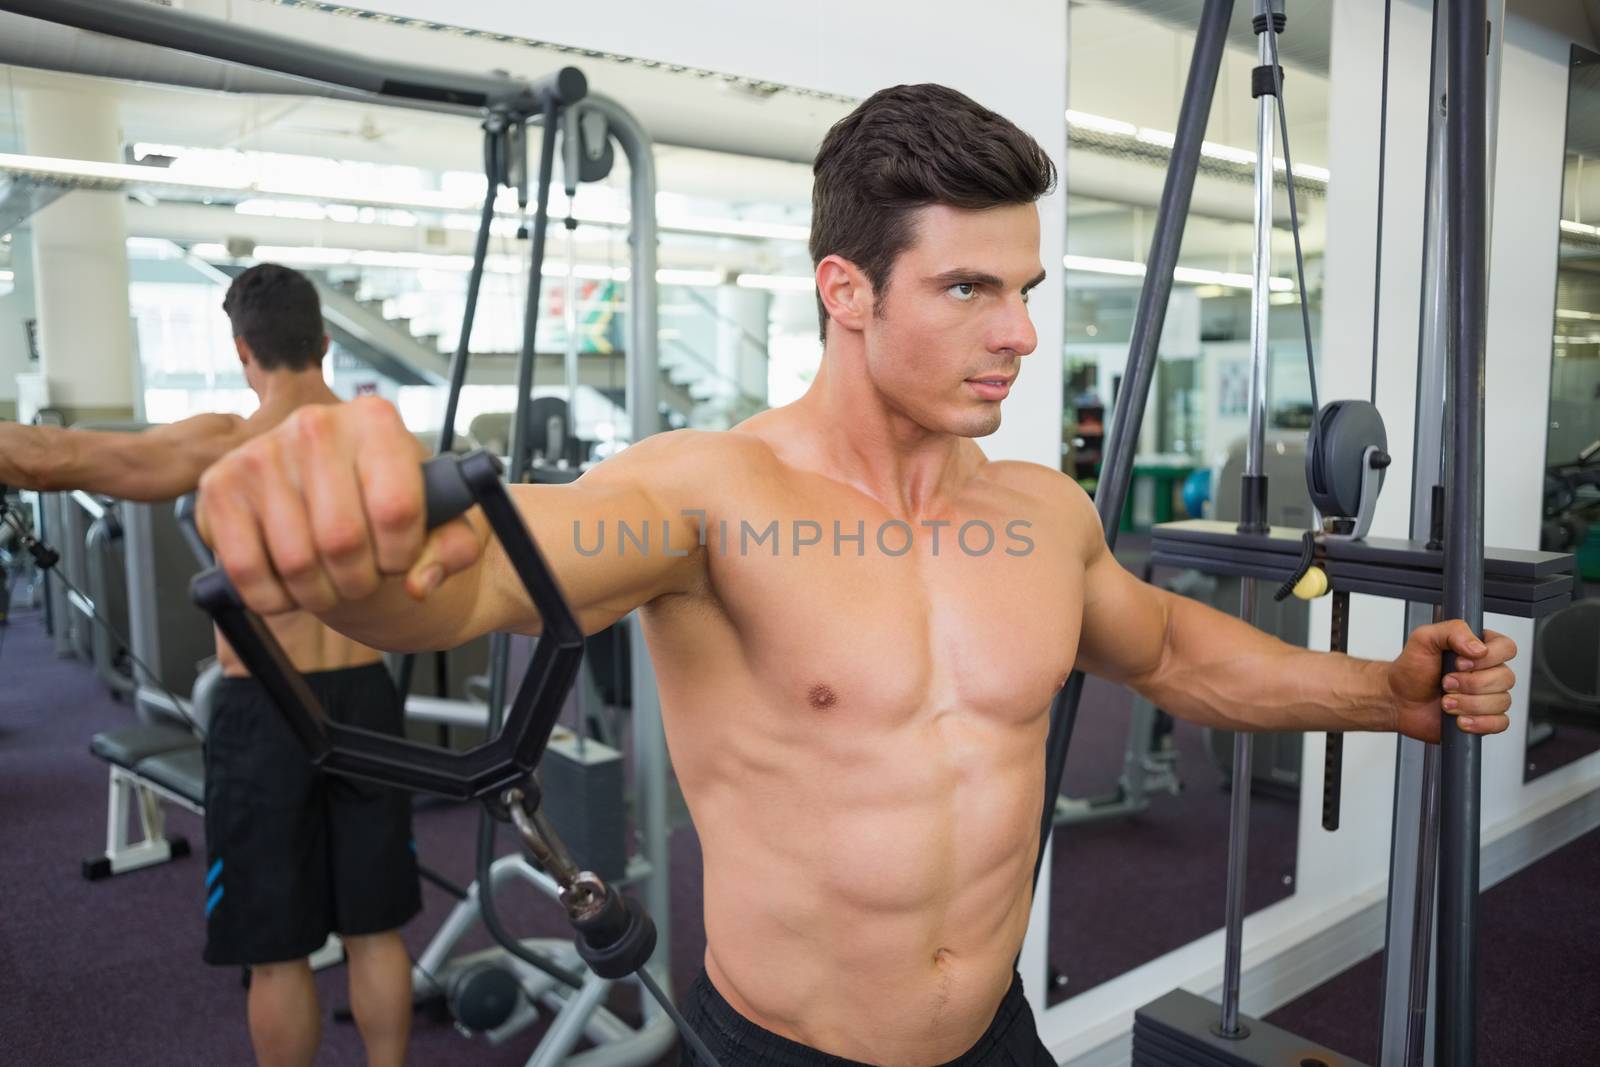 Shirtless muscular man using resistance band in gym by Wavebreakmedia